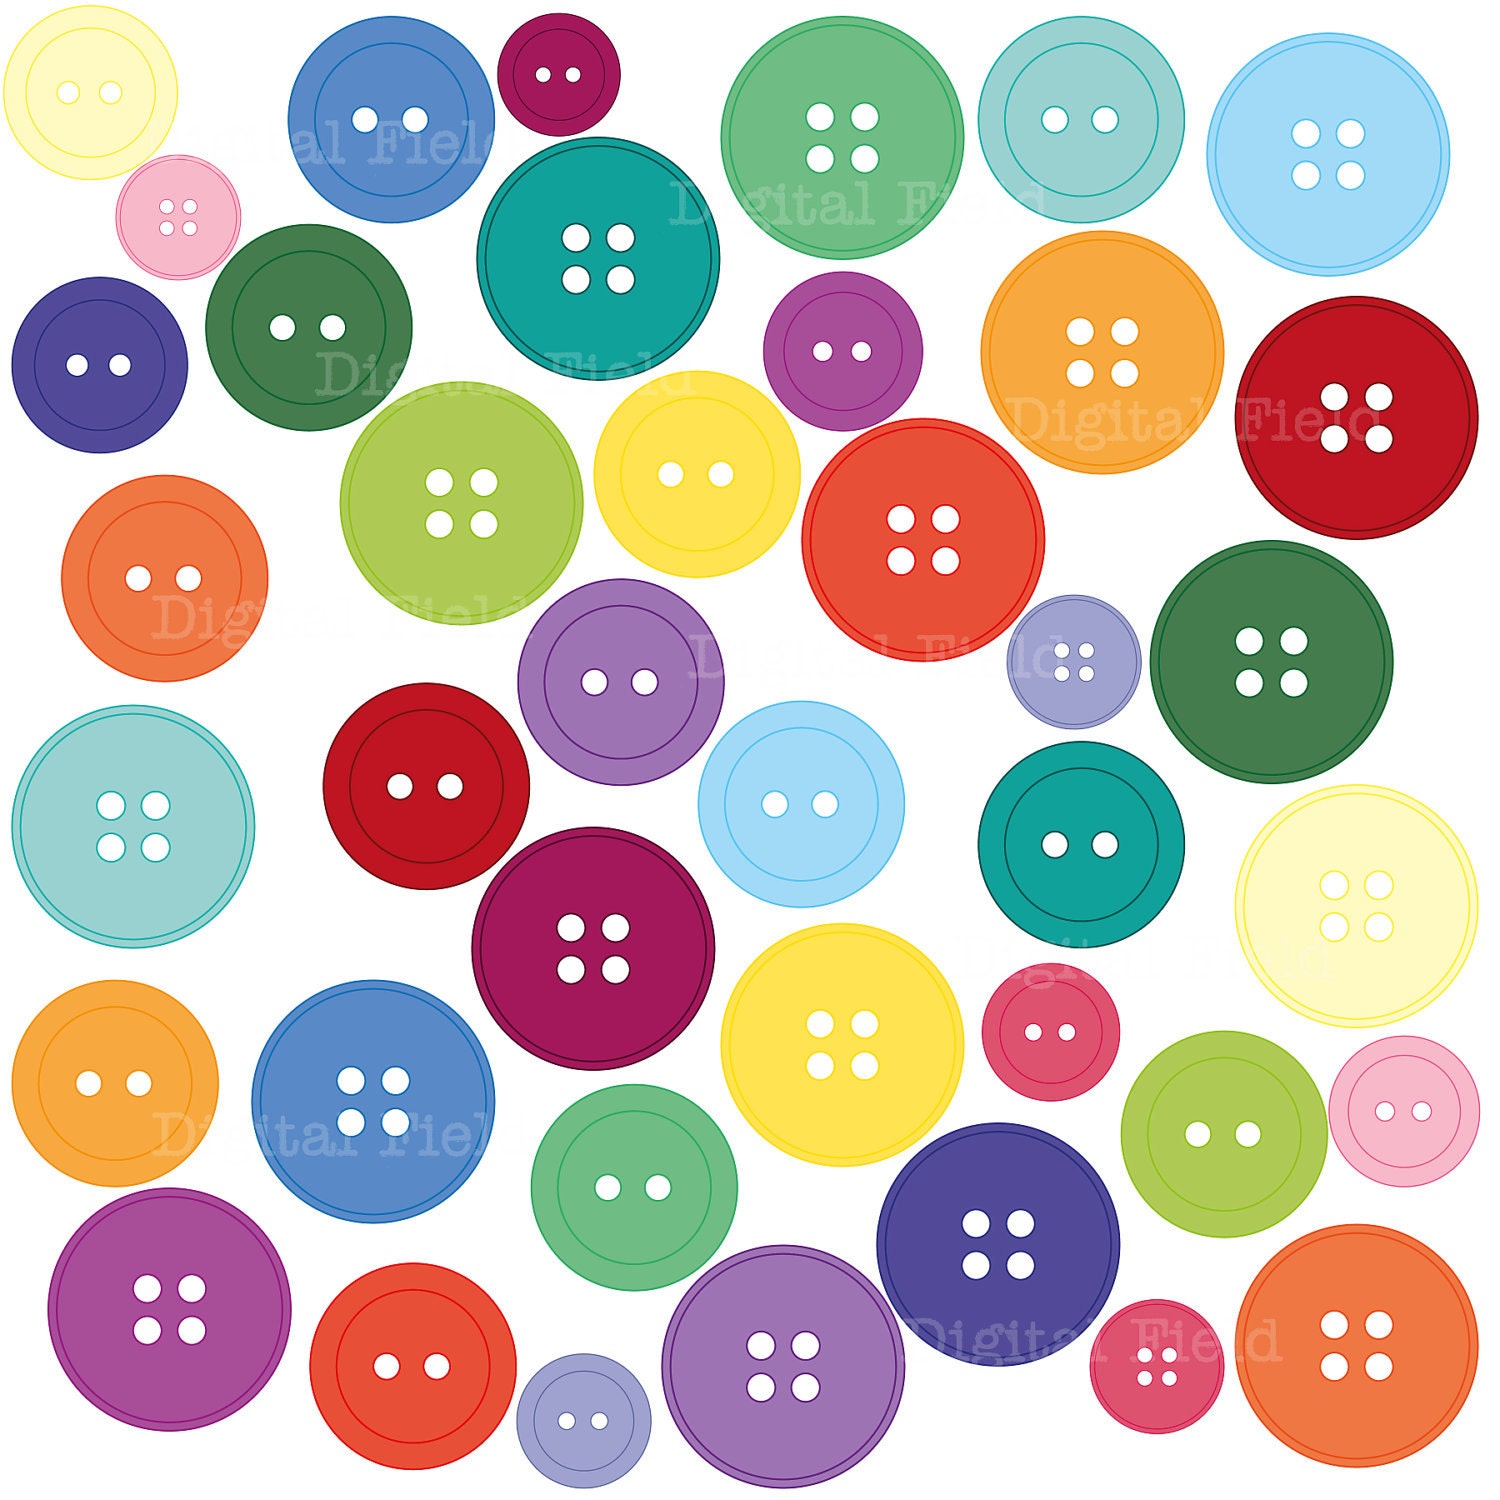 free clipart buttons download - photo #46